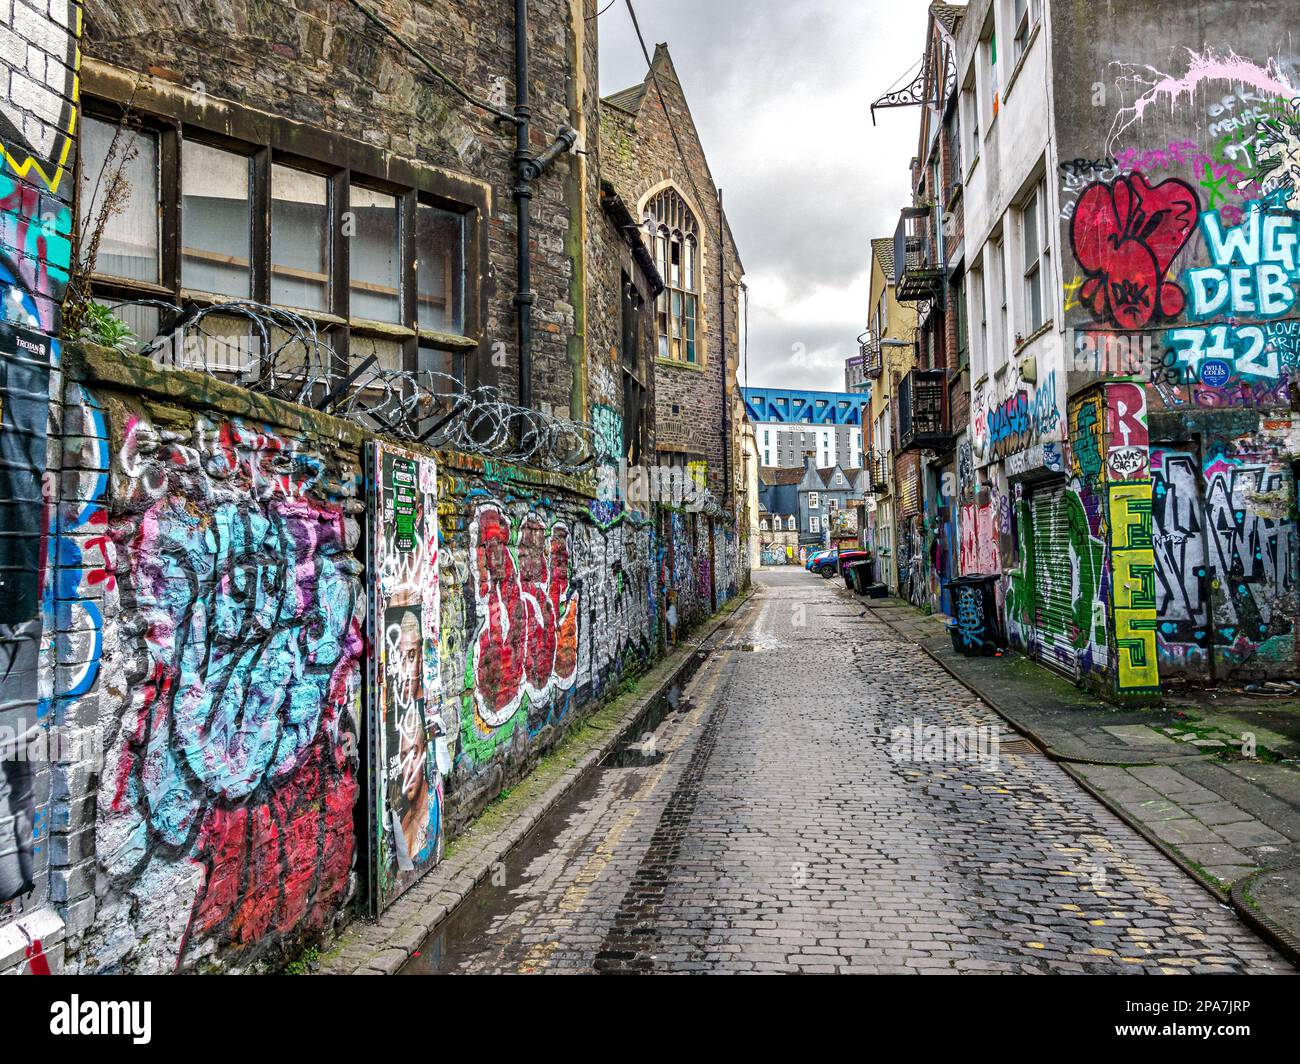 Graffiti covered walls of a narrow alley in the Stokes Croft area close to the city centre of Bristol UK Stock Photo